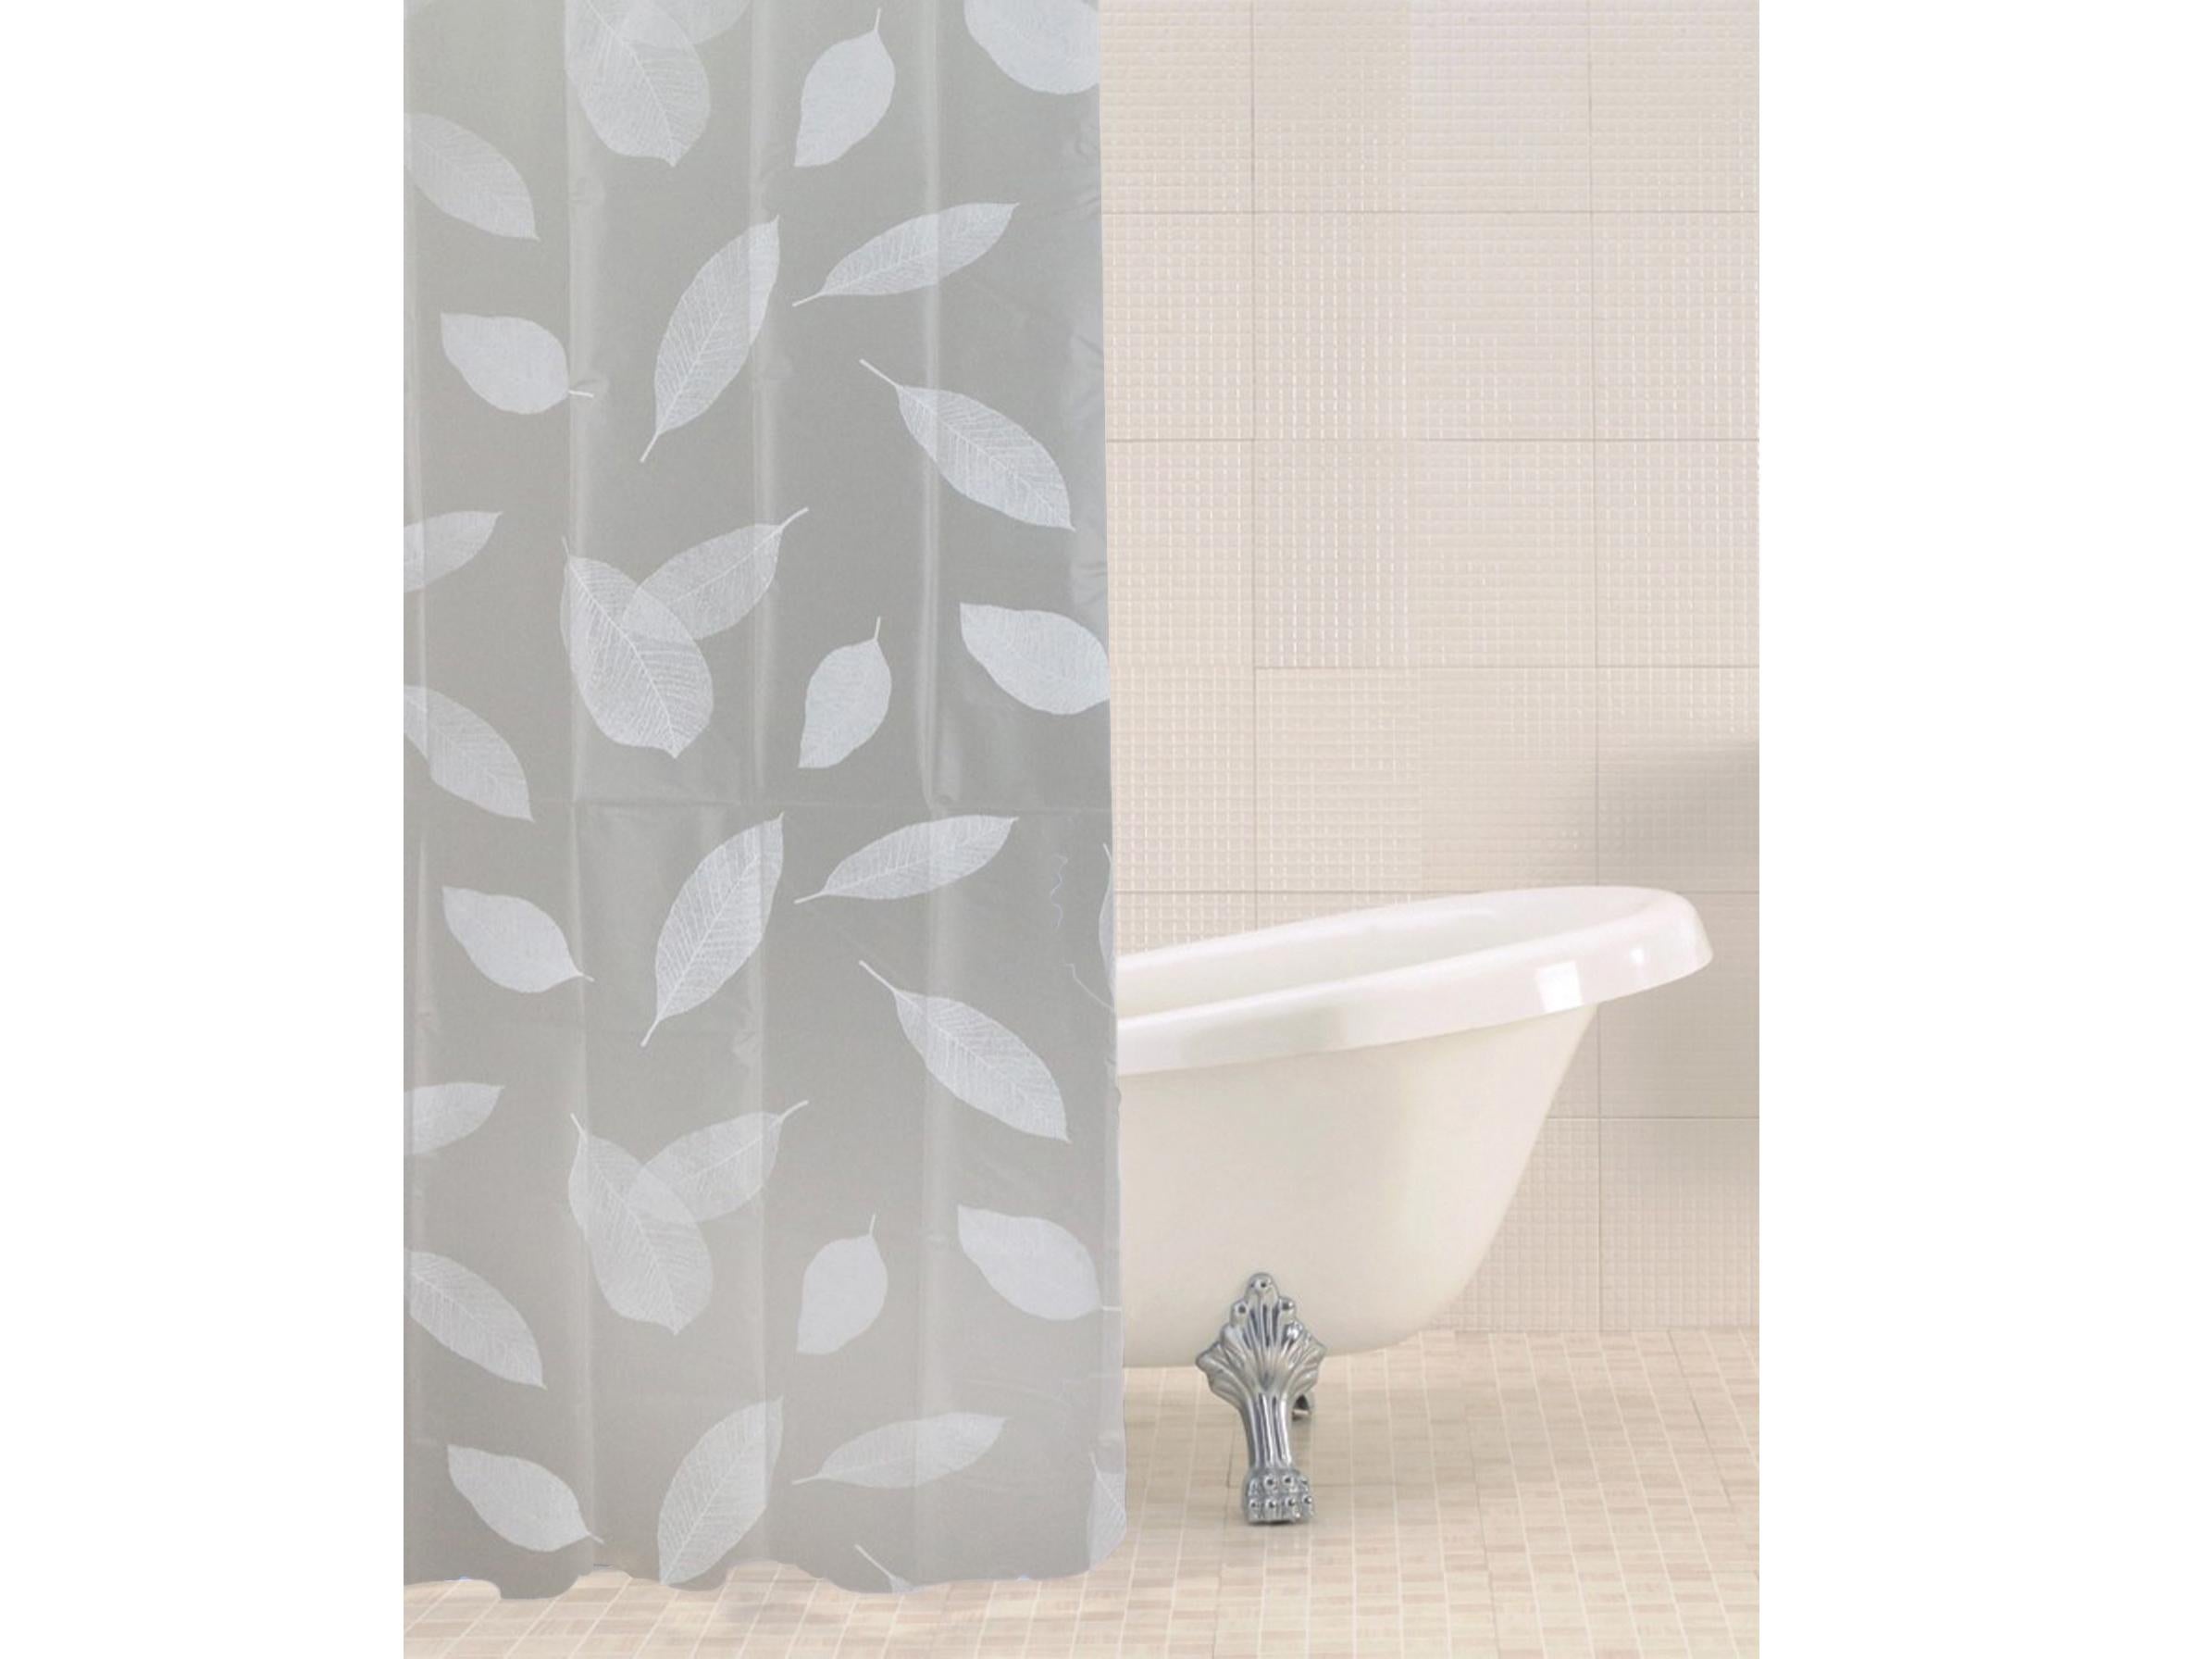 Details about   Easy Clean Shower Curtain Bathroom Bath Curtains Shower Curtain Water Proof Z7N6 